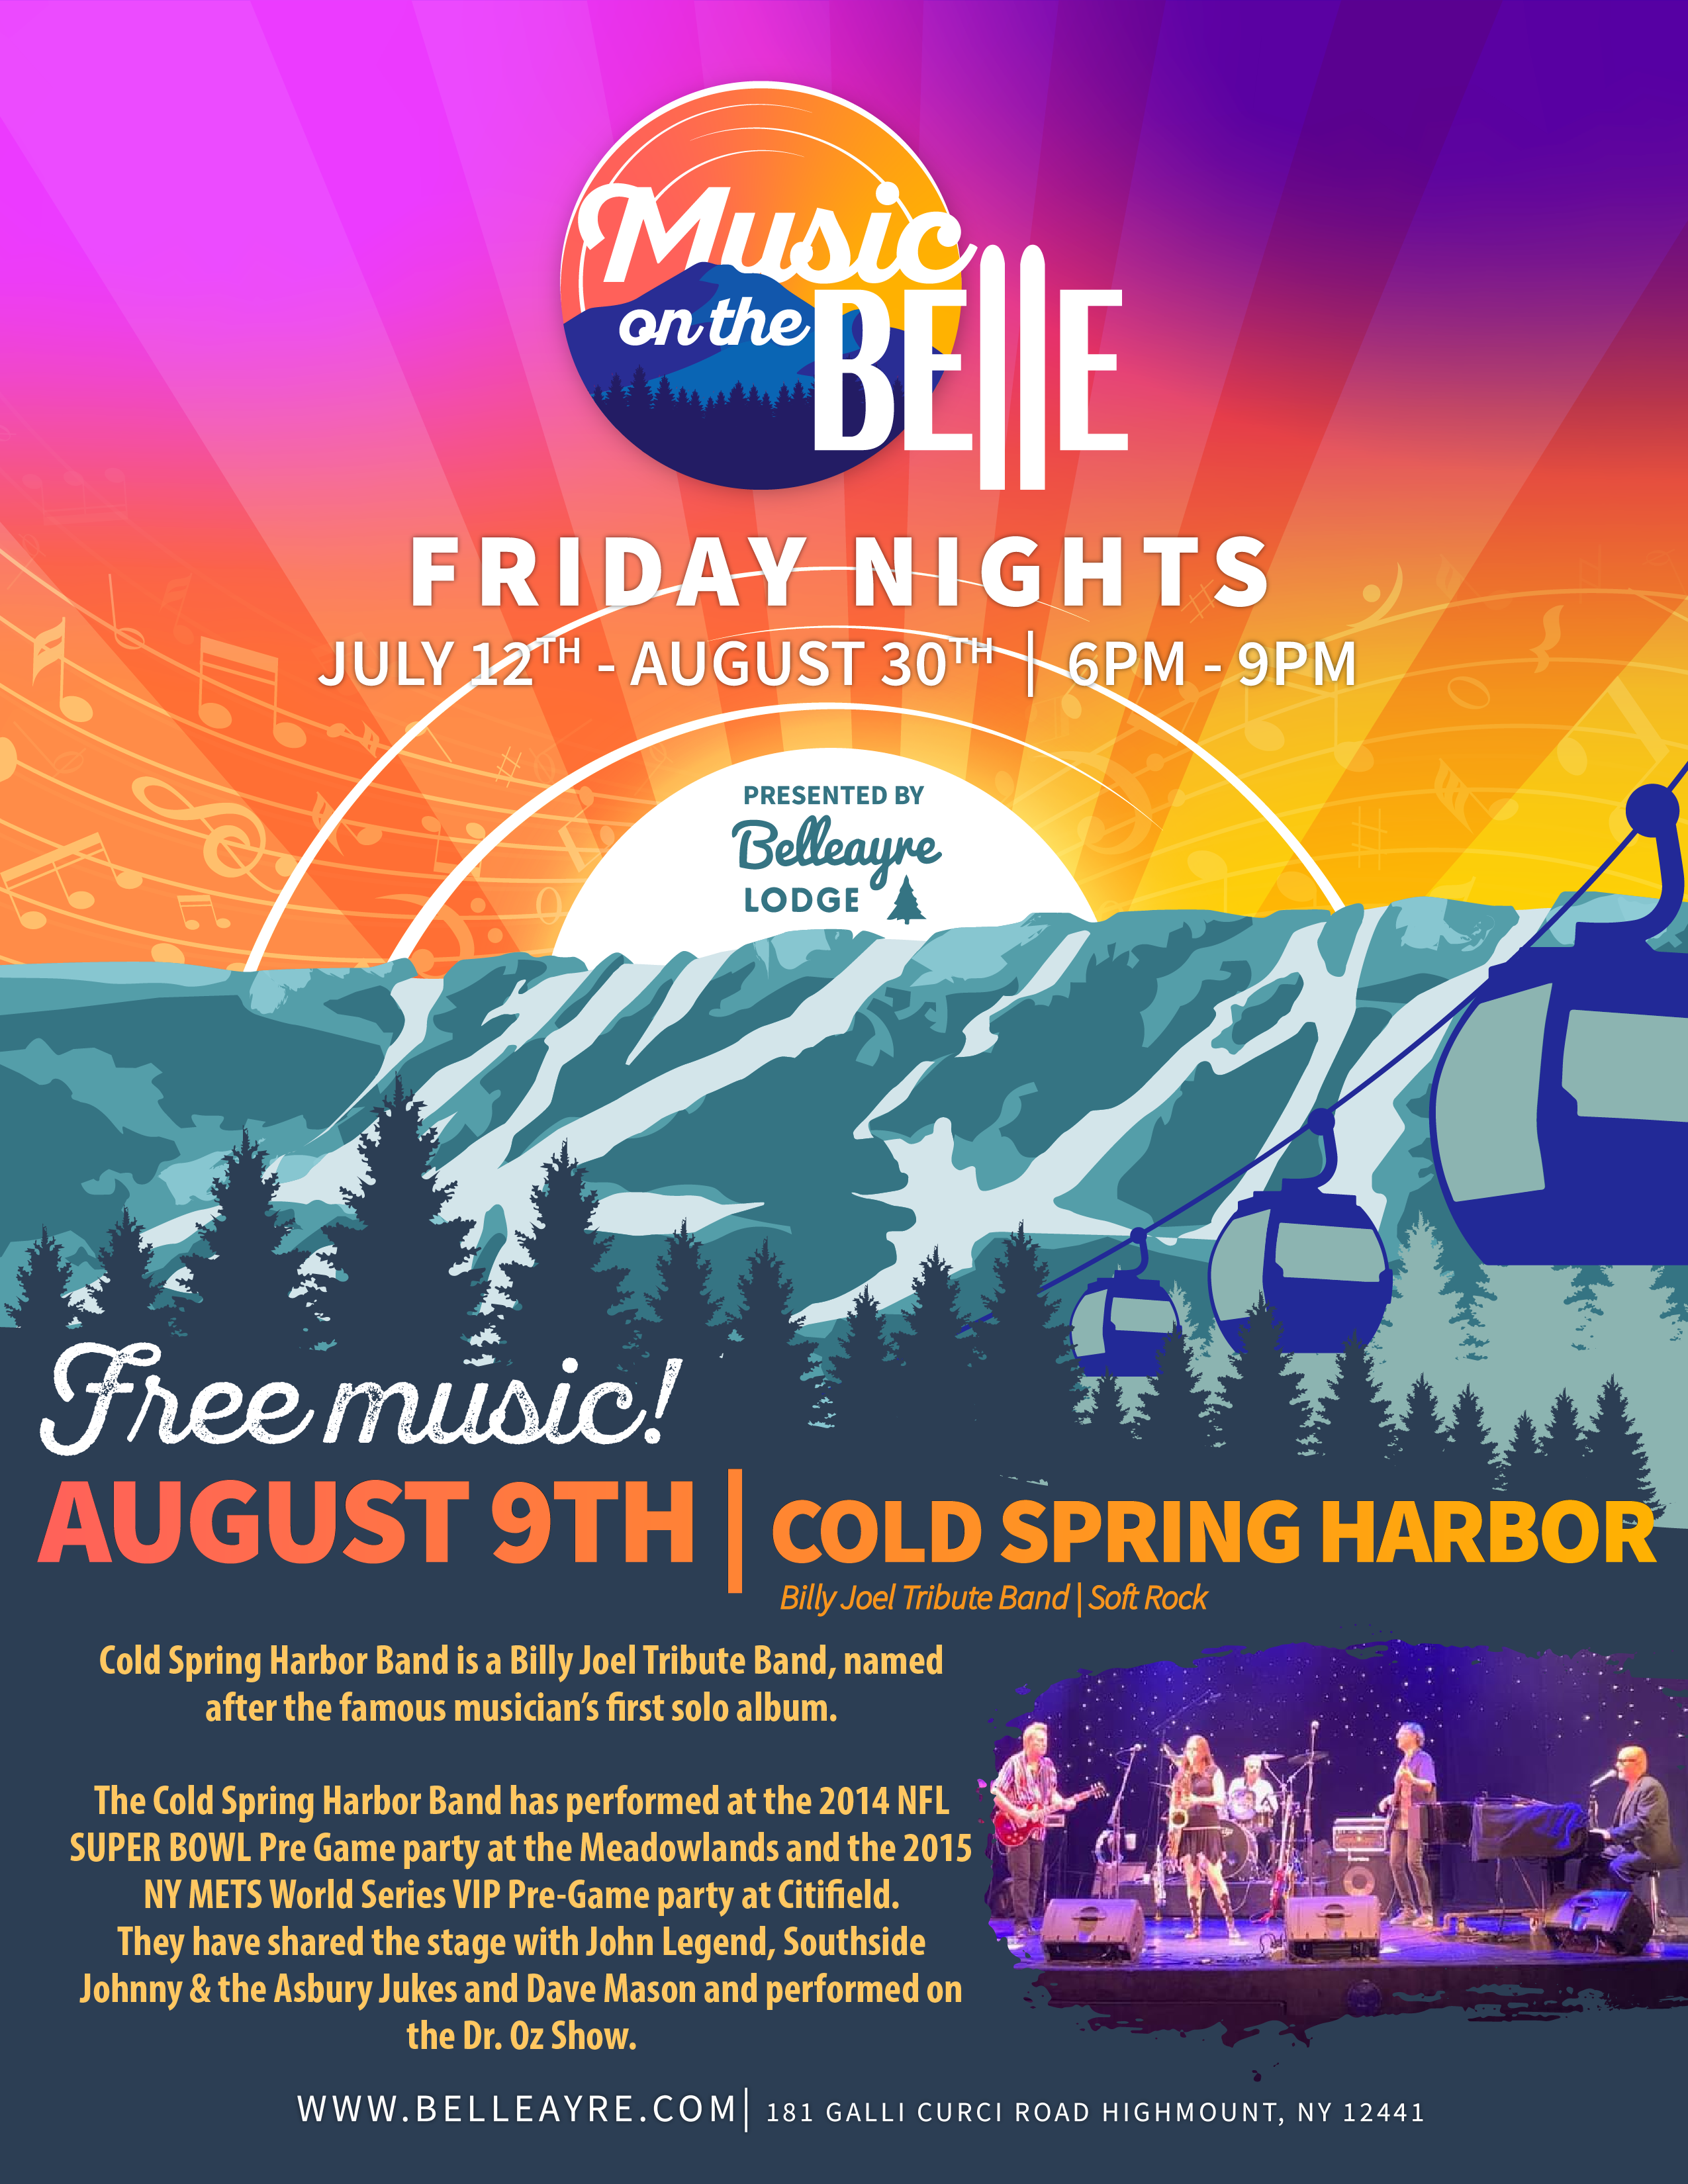 Cold Spring Harbor Music on the Belle Friday nights flyer August 9th